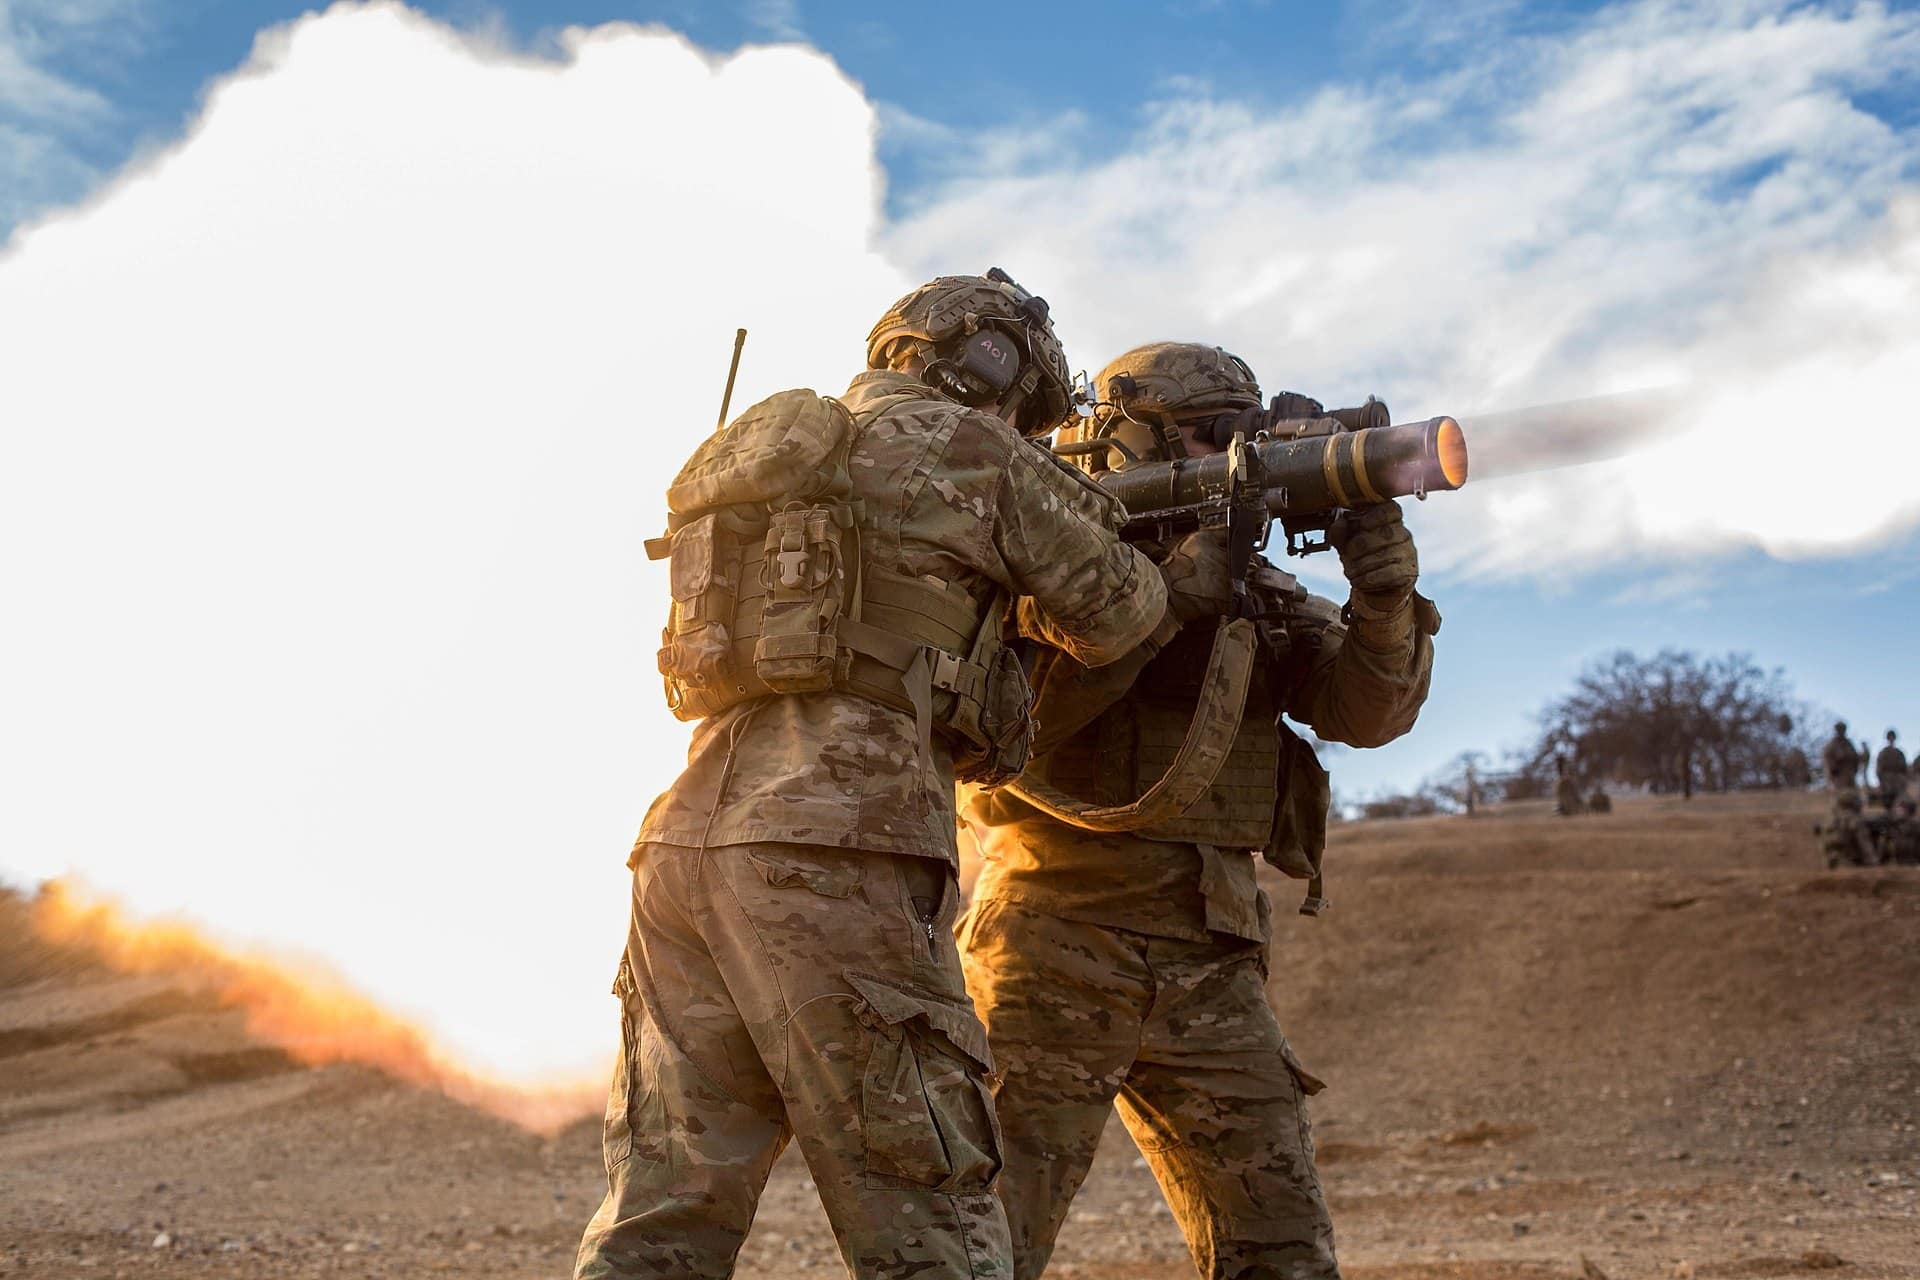 U.S. Army Rangers assigned to 2nd Battalion, 75th Ranger Regiment, fire off a AT-4 at a range on Camp Roberts, Calif., Jan 26, 2014. Rangers use a multitude of weaponry during their annual tactical training. (U.S. Army photo by Pfc. Rashene Mincy/ Not Reviewed)